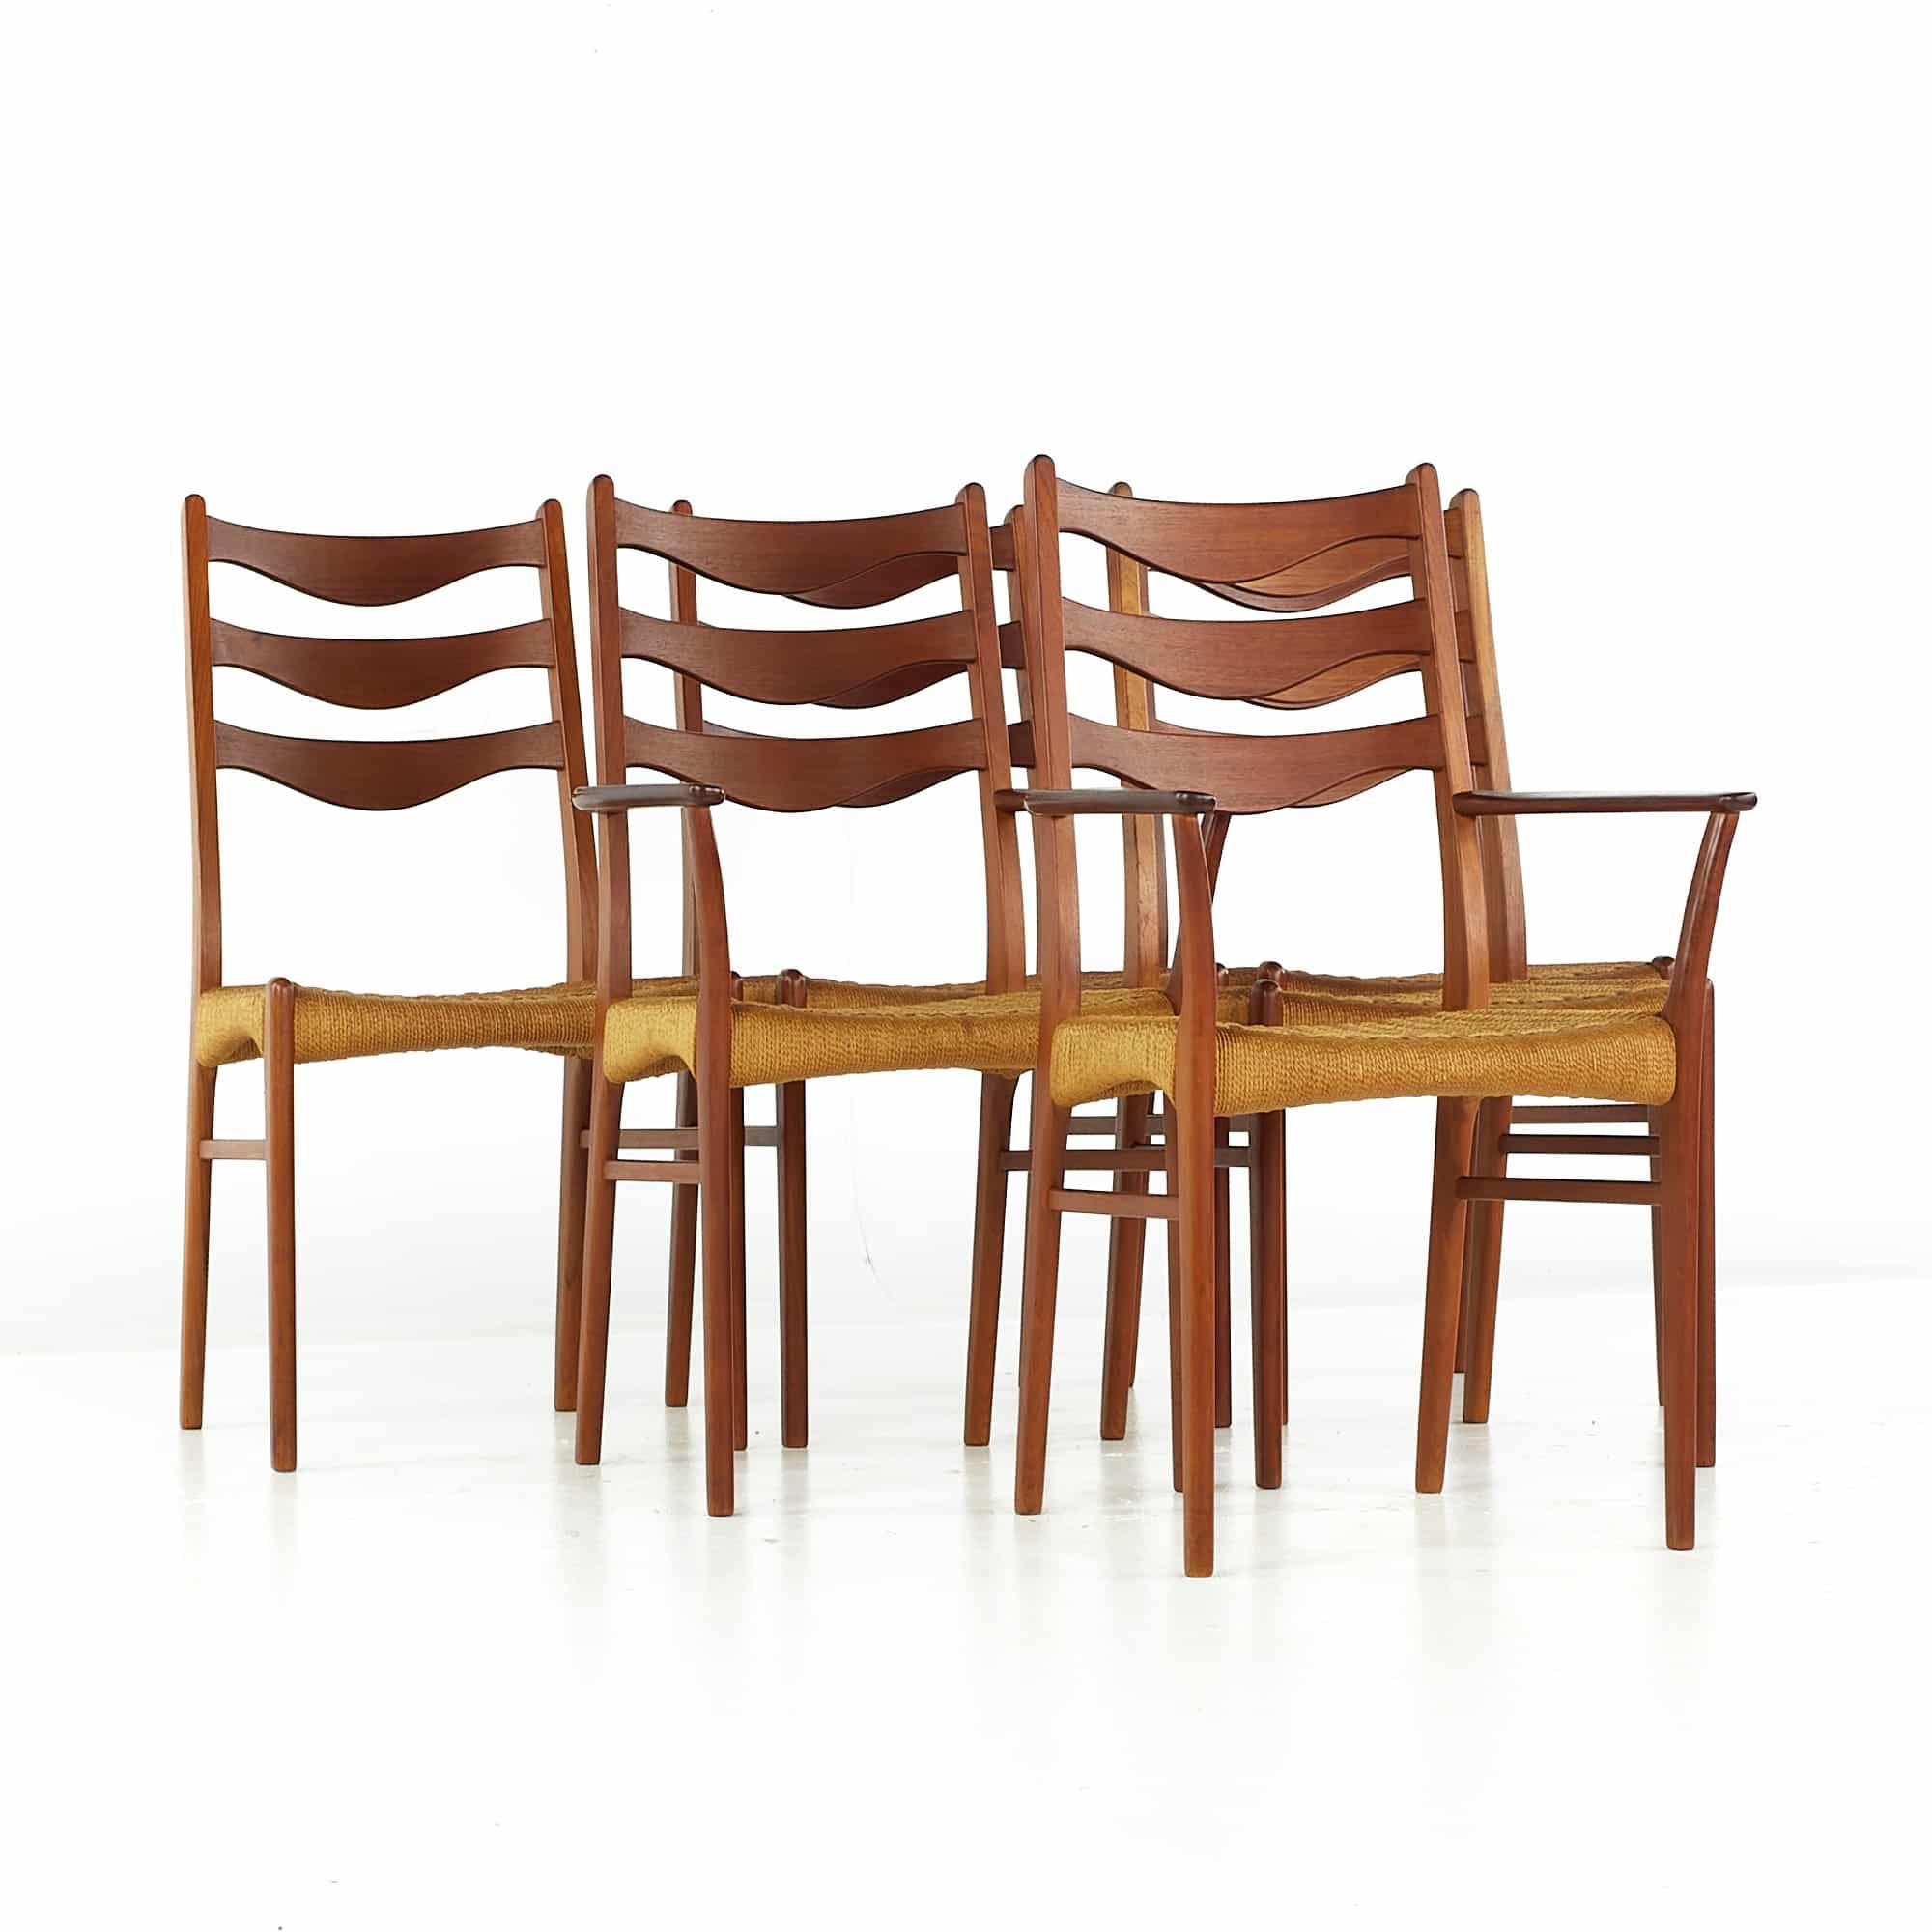 Arne Wahl Iversen Gs90 Mid Century Danish Teak Dining Chairs with Rope Seats - Set of 6